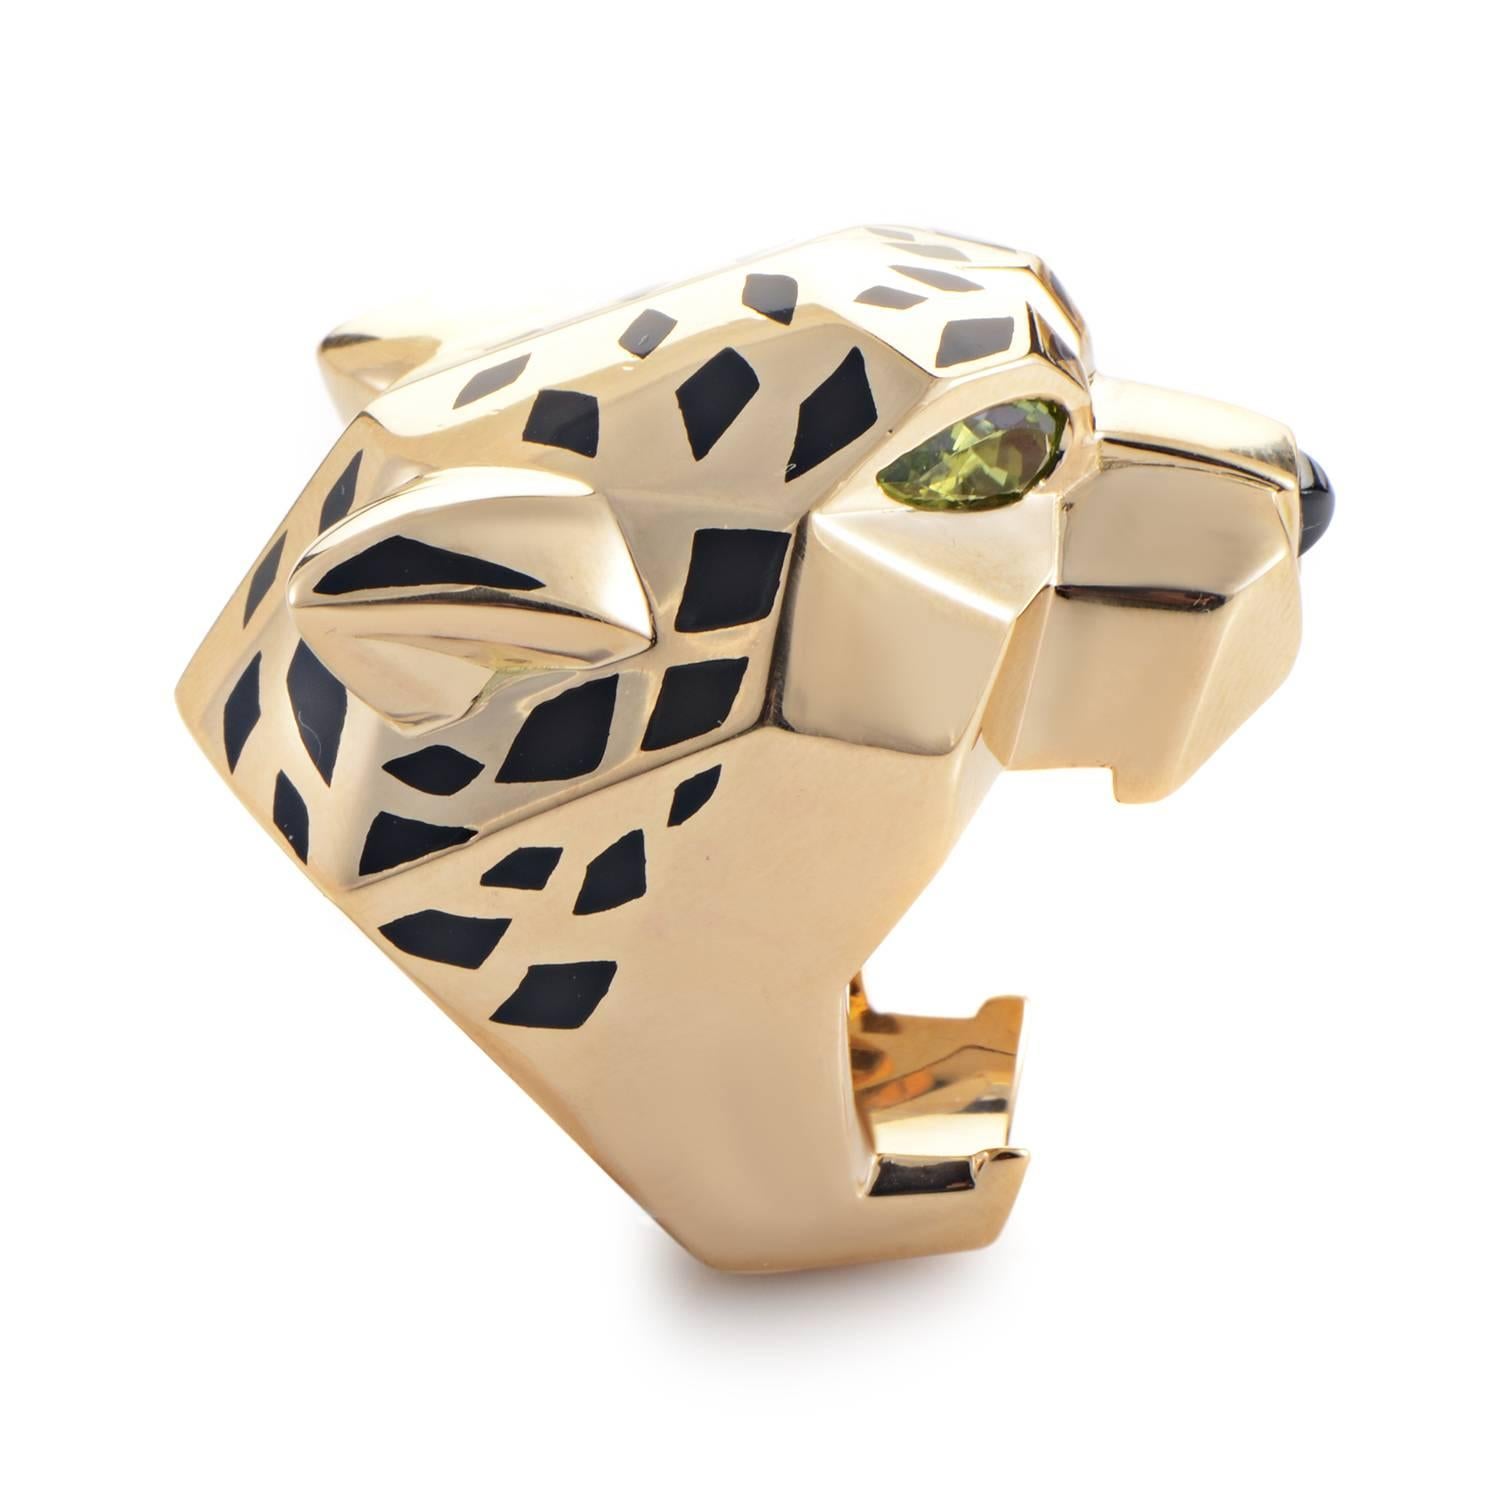 The emblematic panther has been an important part of Cartier's designs since 1914. This fiercely fashionable design from the Panthère de Cartier collection is made of 18K yellow gold and boasts an almost faceted look. The ring is covered with black